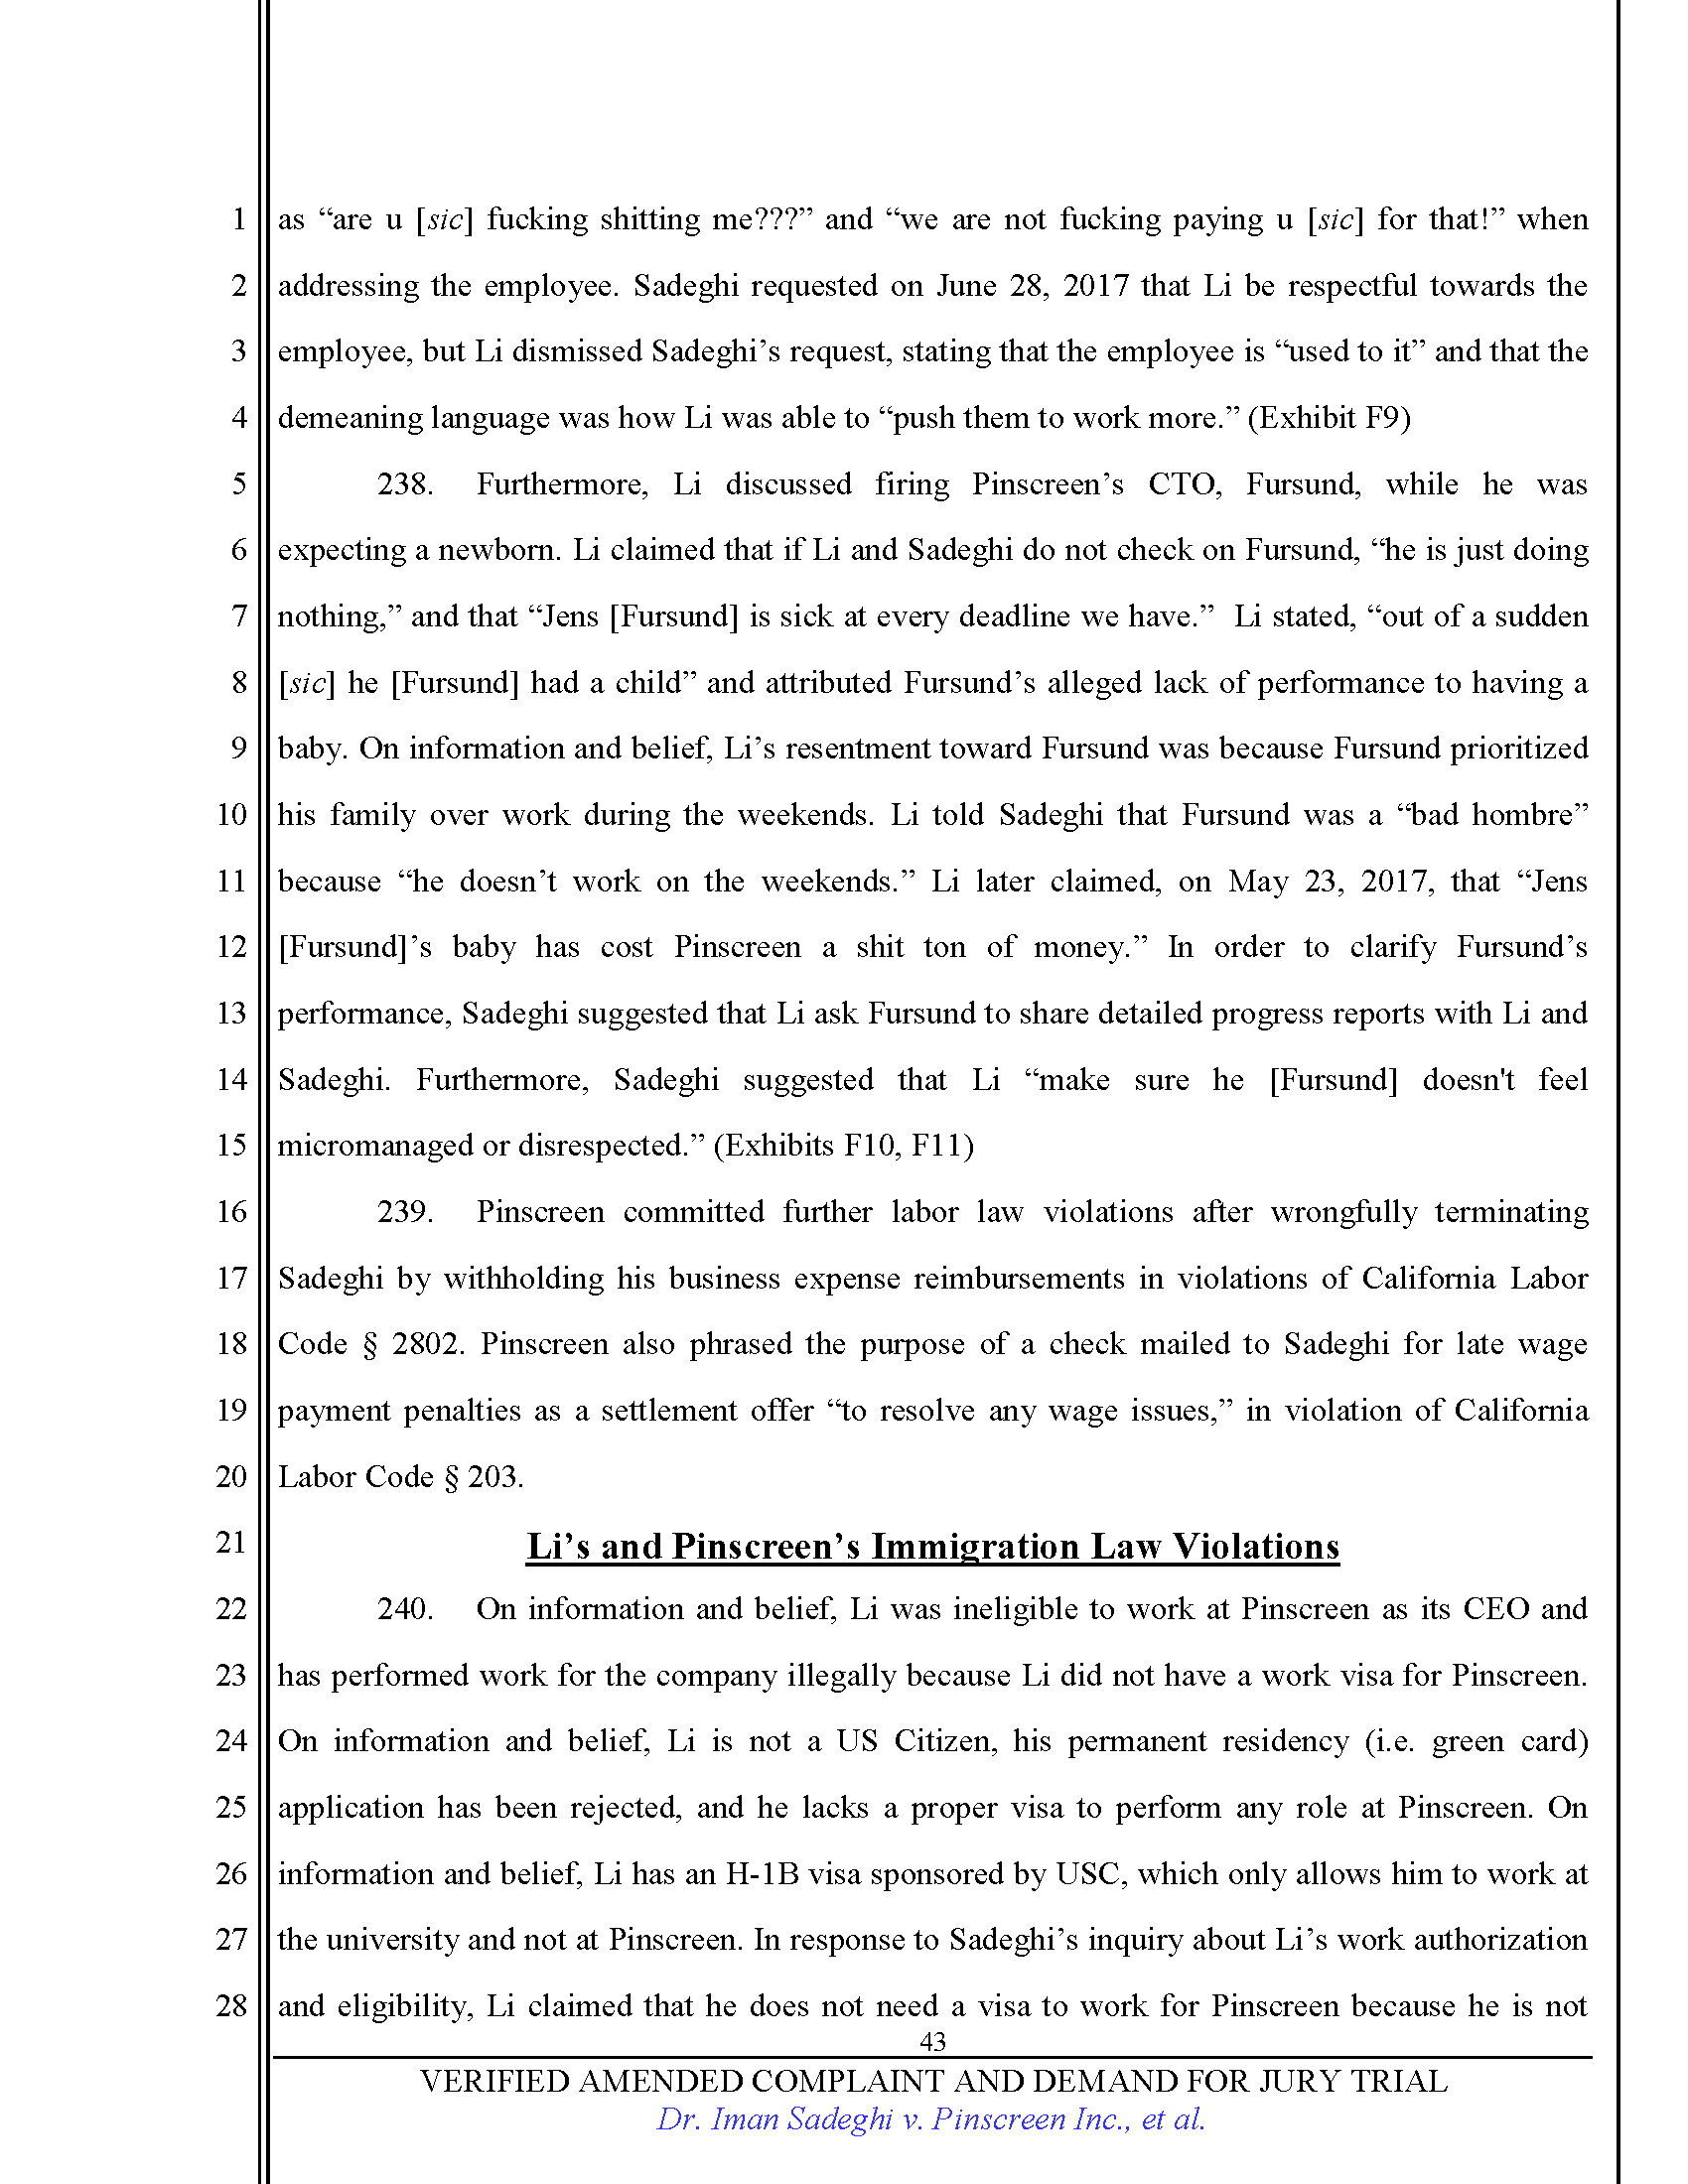 First Amended Complaint (FAC) Page 43